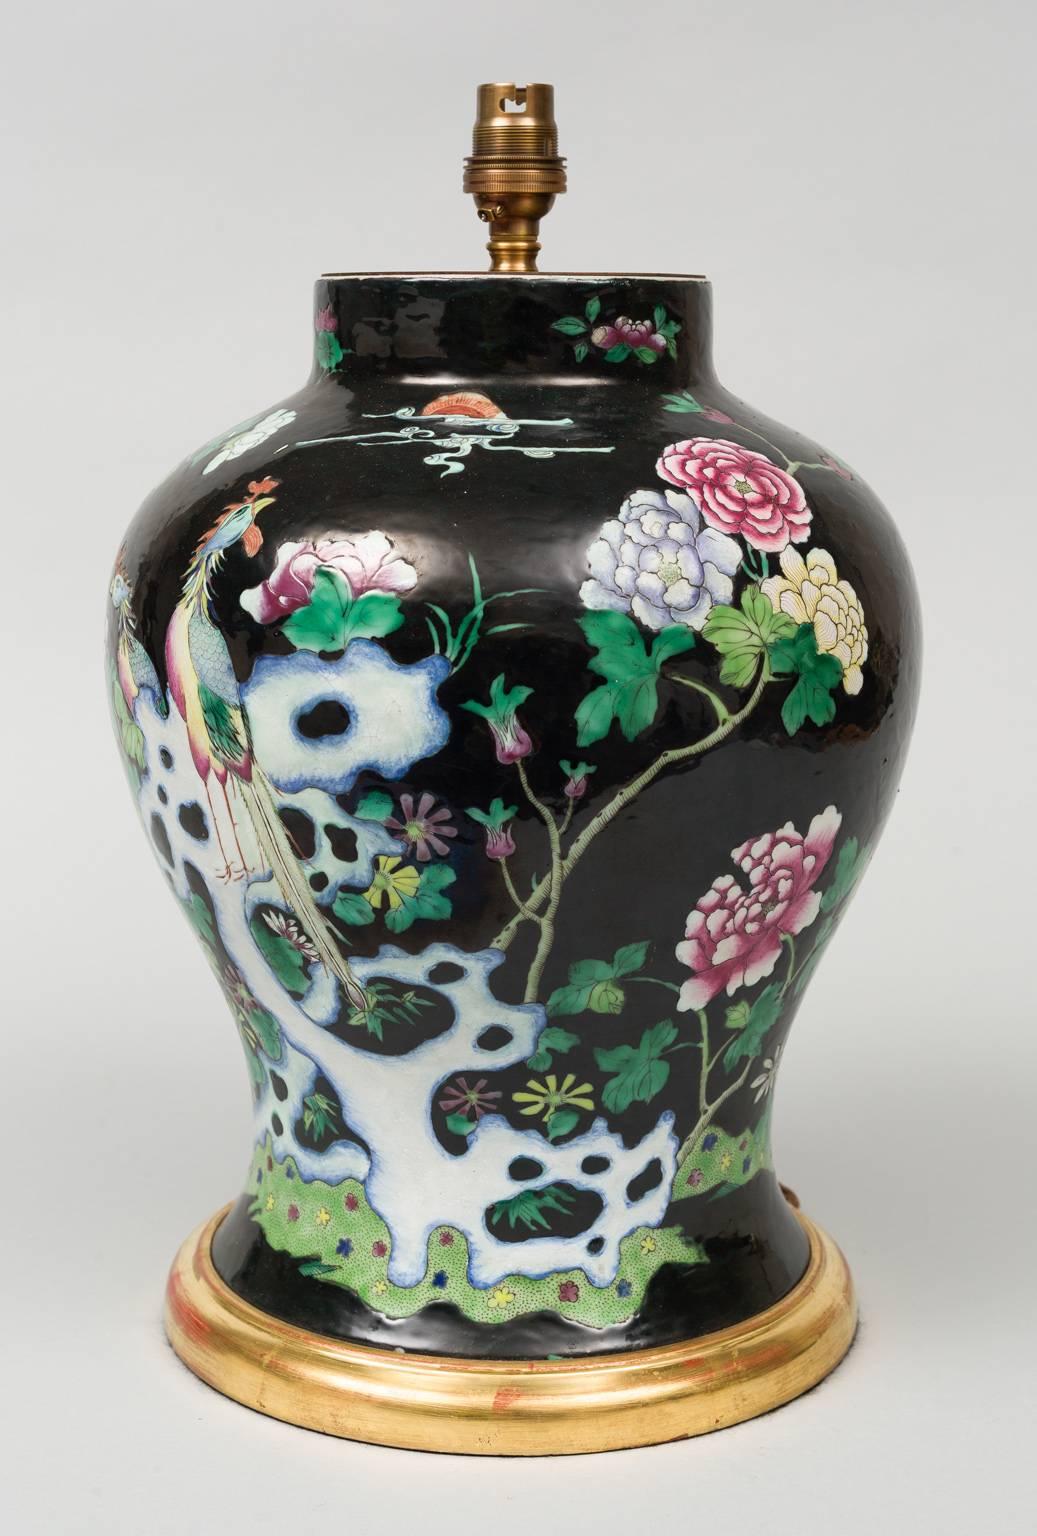 Chinese porcelain baluster-shaped famille noire vase lamped, finely decorated with a pair of phoenix birds perched on a white tree-like stump with chrysanthemums and other floral designs in pinks, blues, greens and yellow on a black ground, mounted